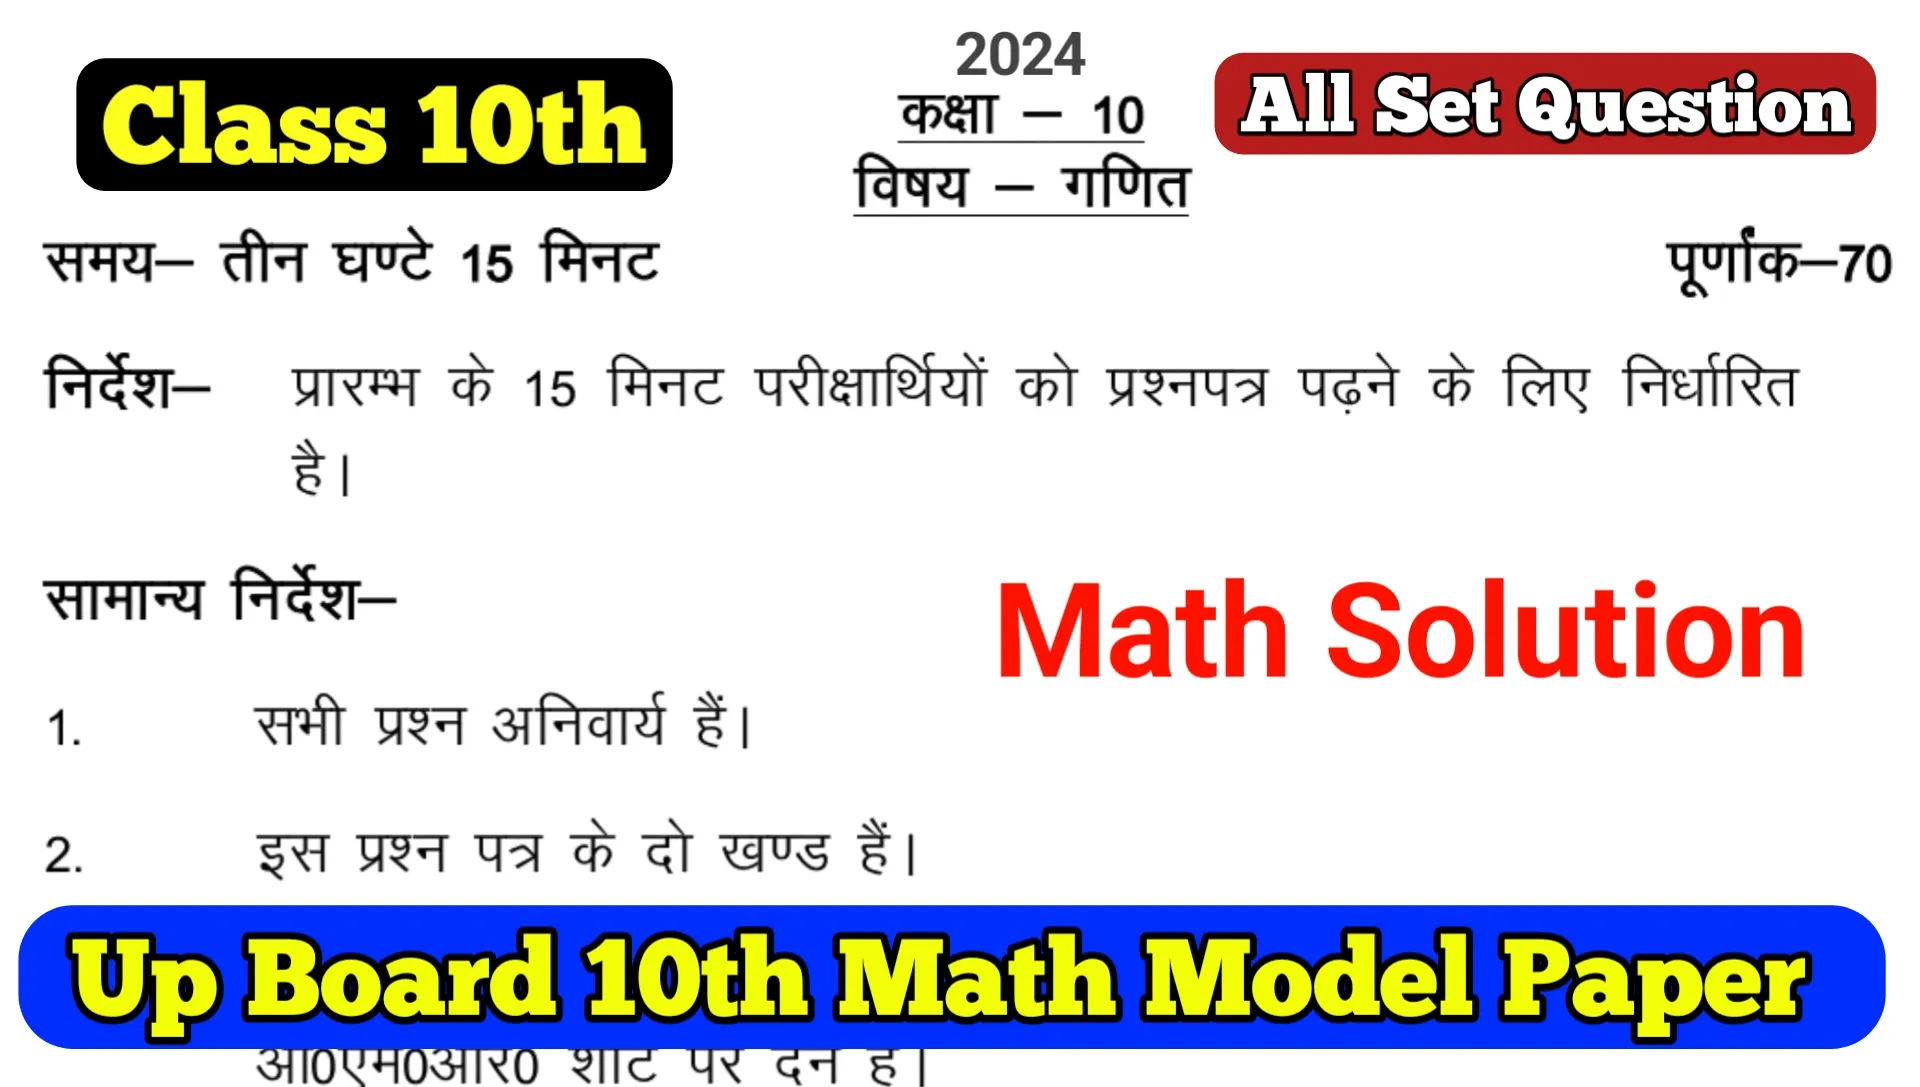 Up Board 10th Math Question Paper 2024